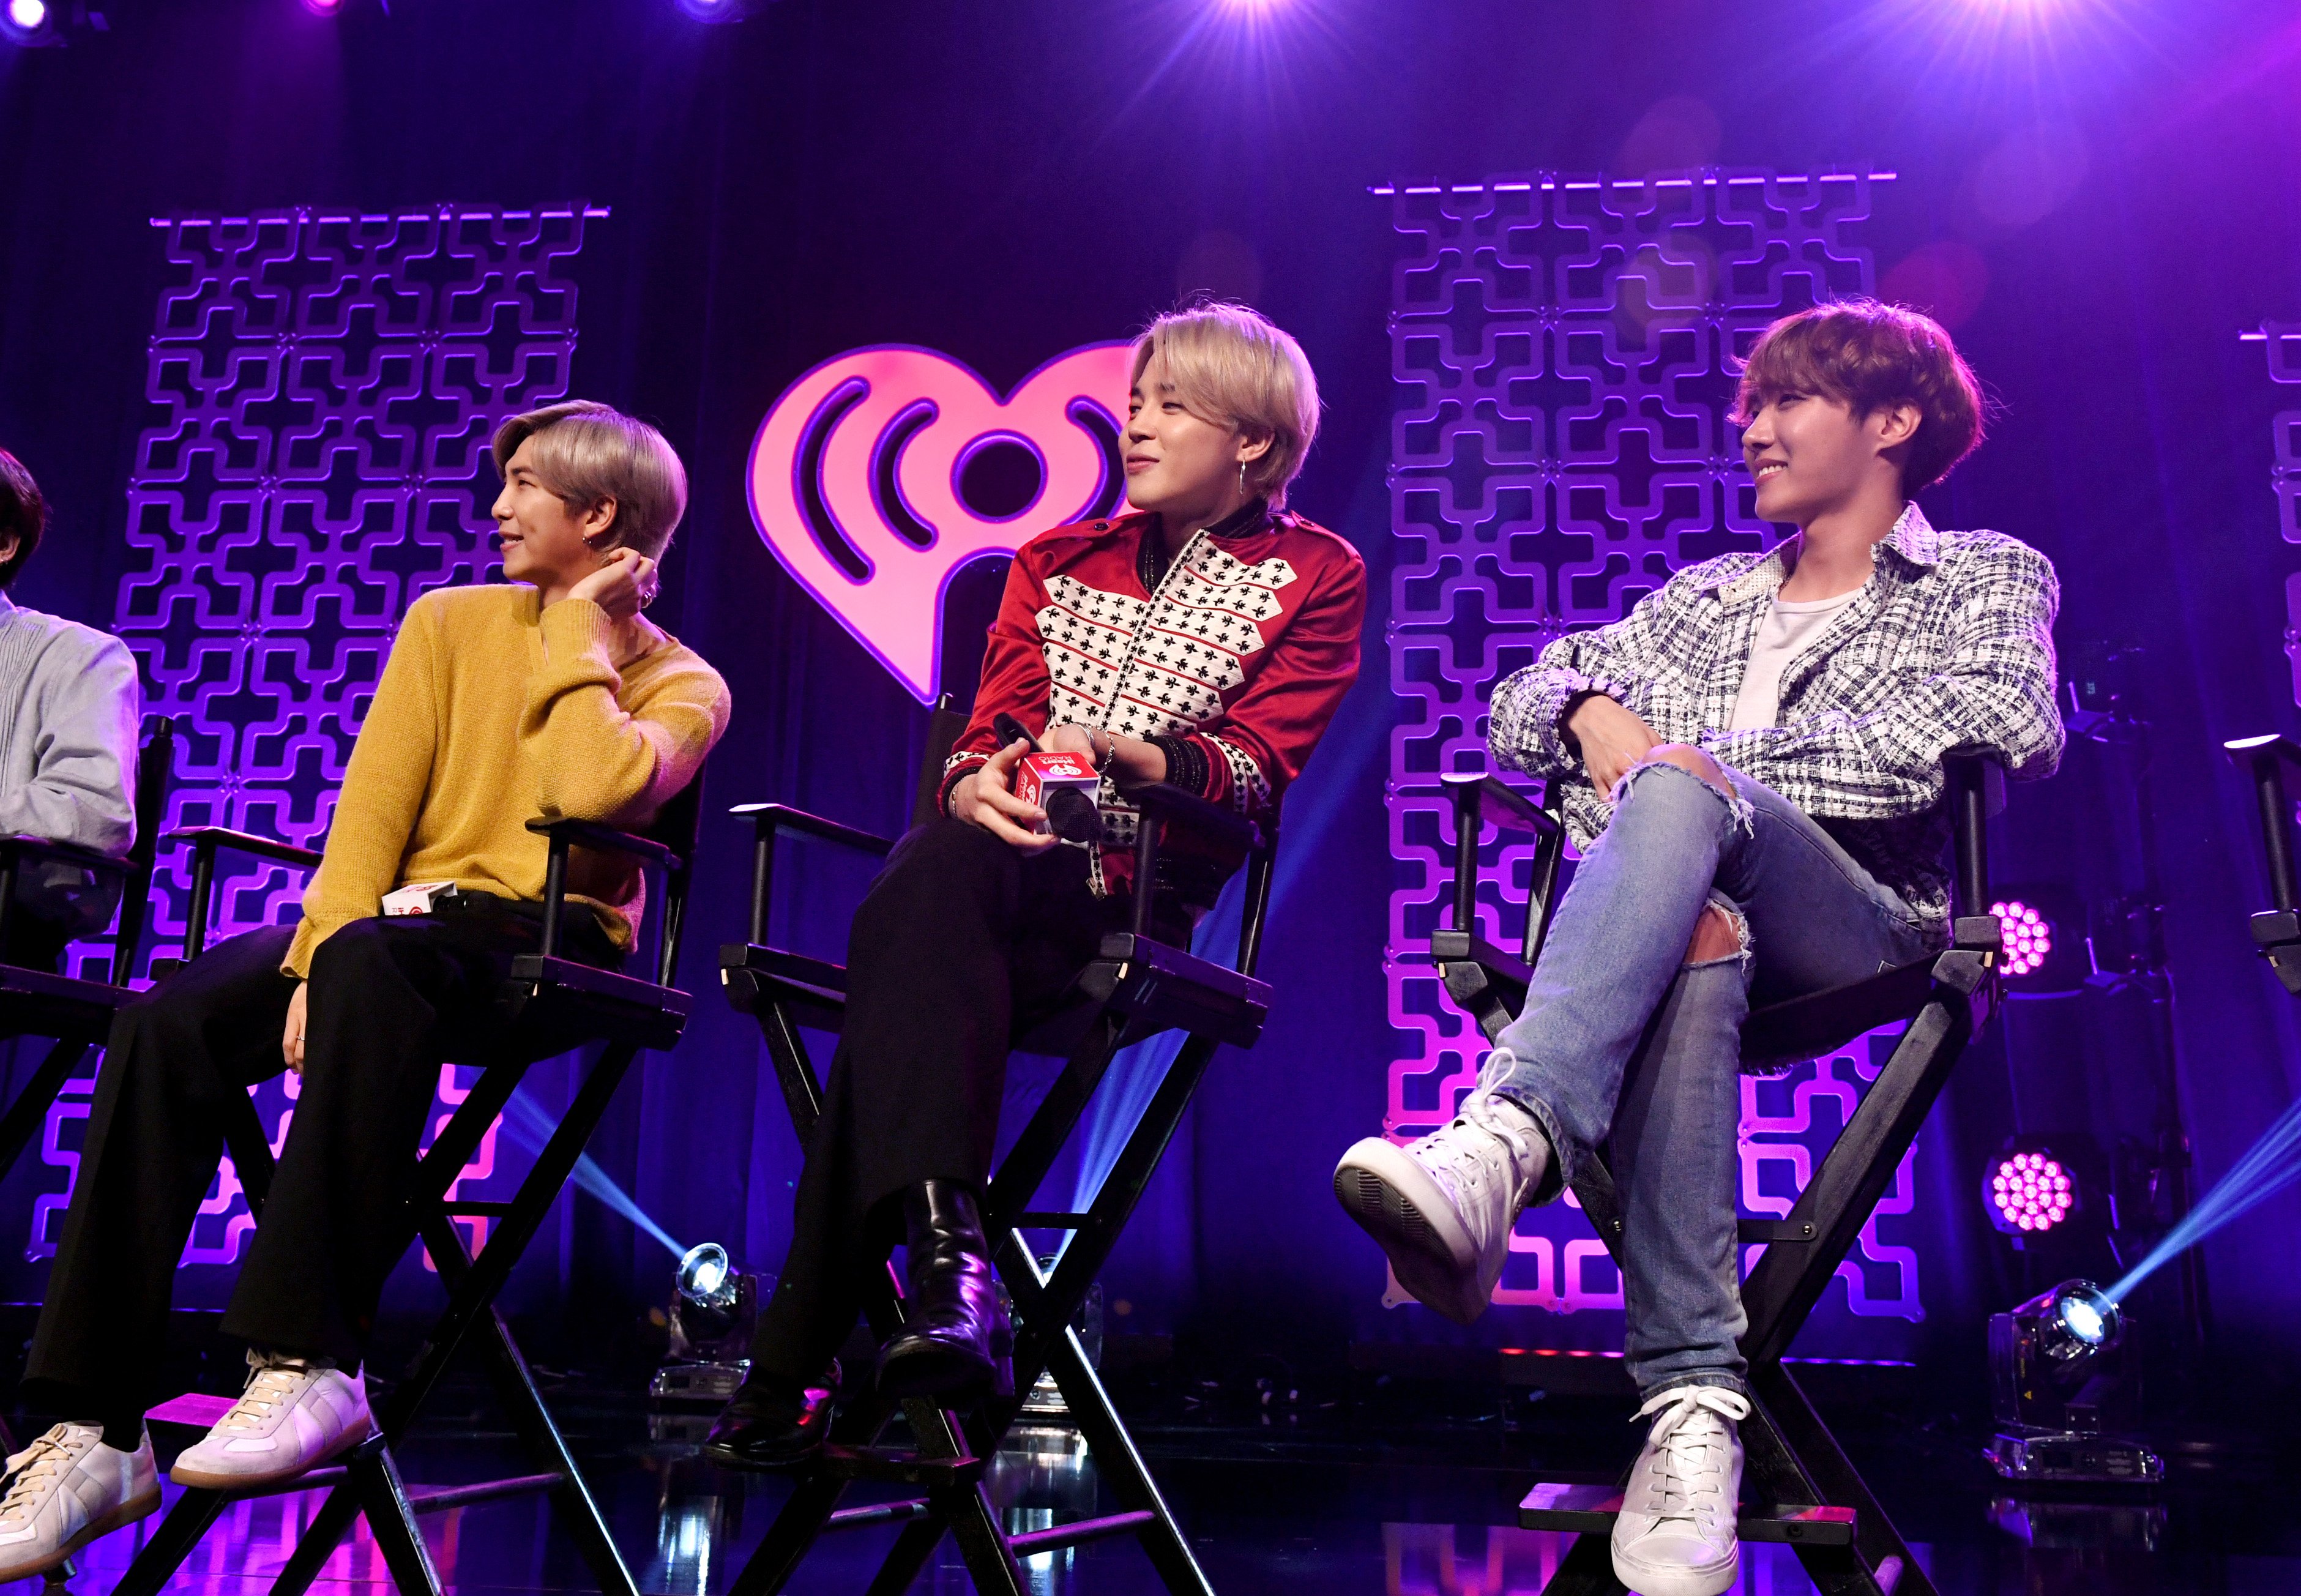 RM, Jimin, and J-Hope of BTS speak on stage at iHeartRadio LIVE with BTS